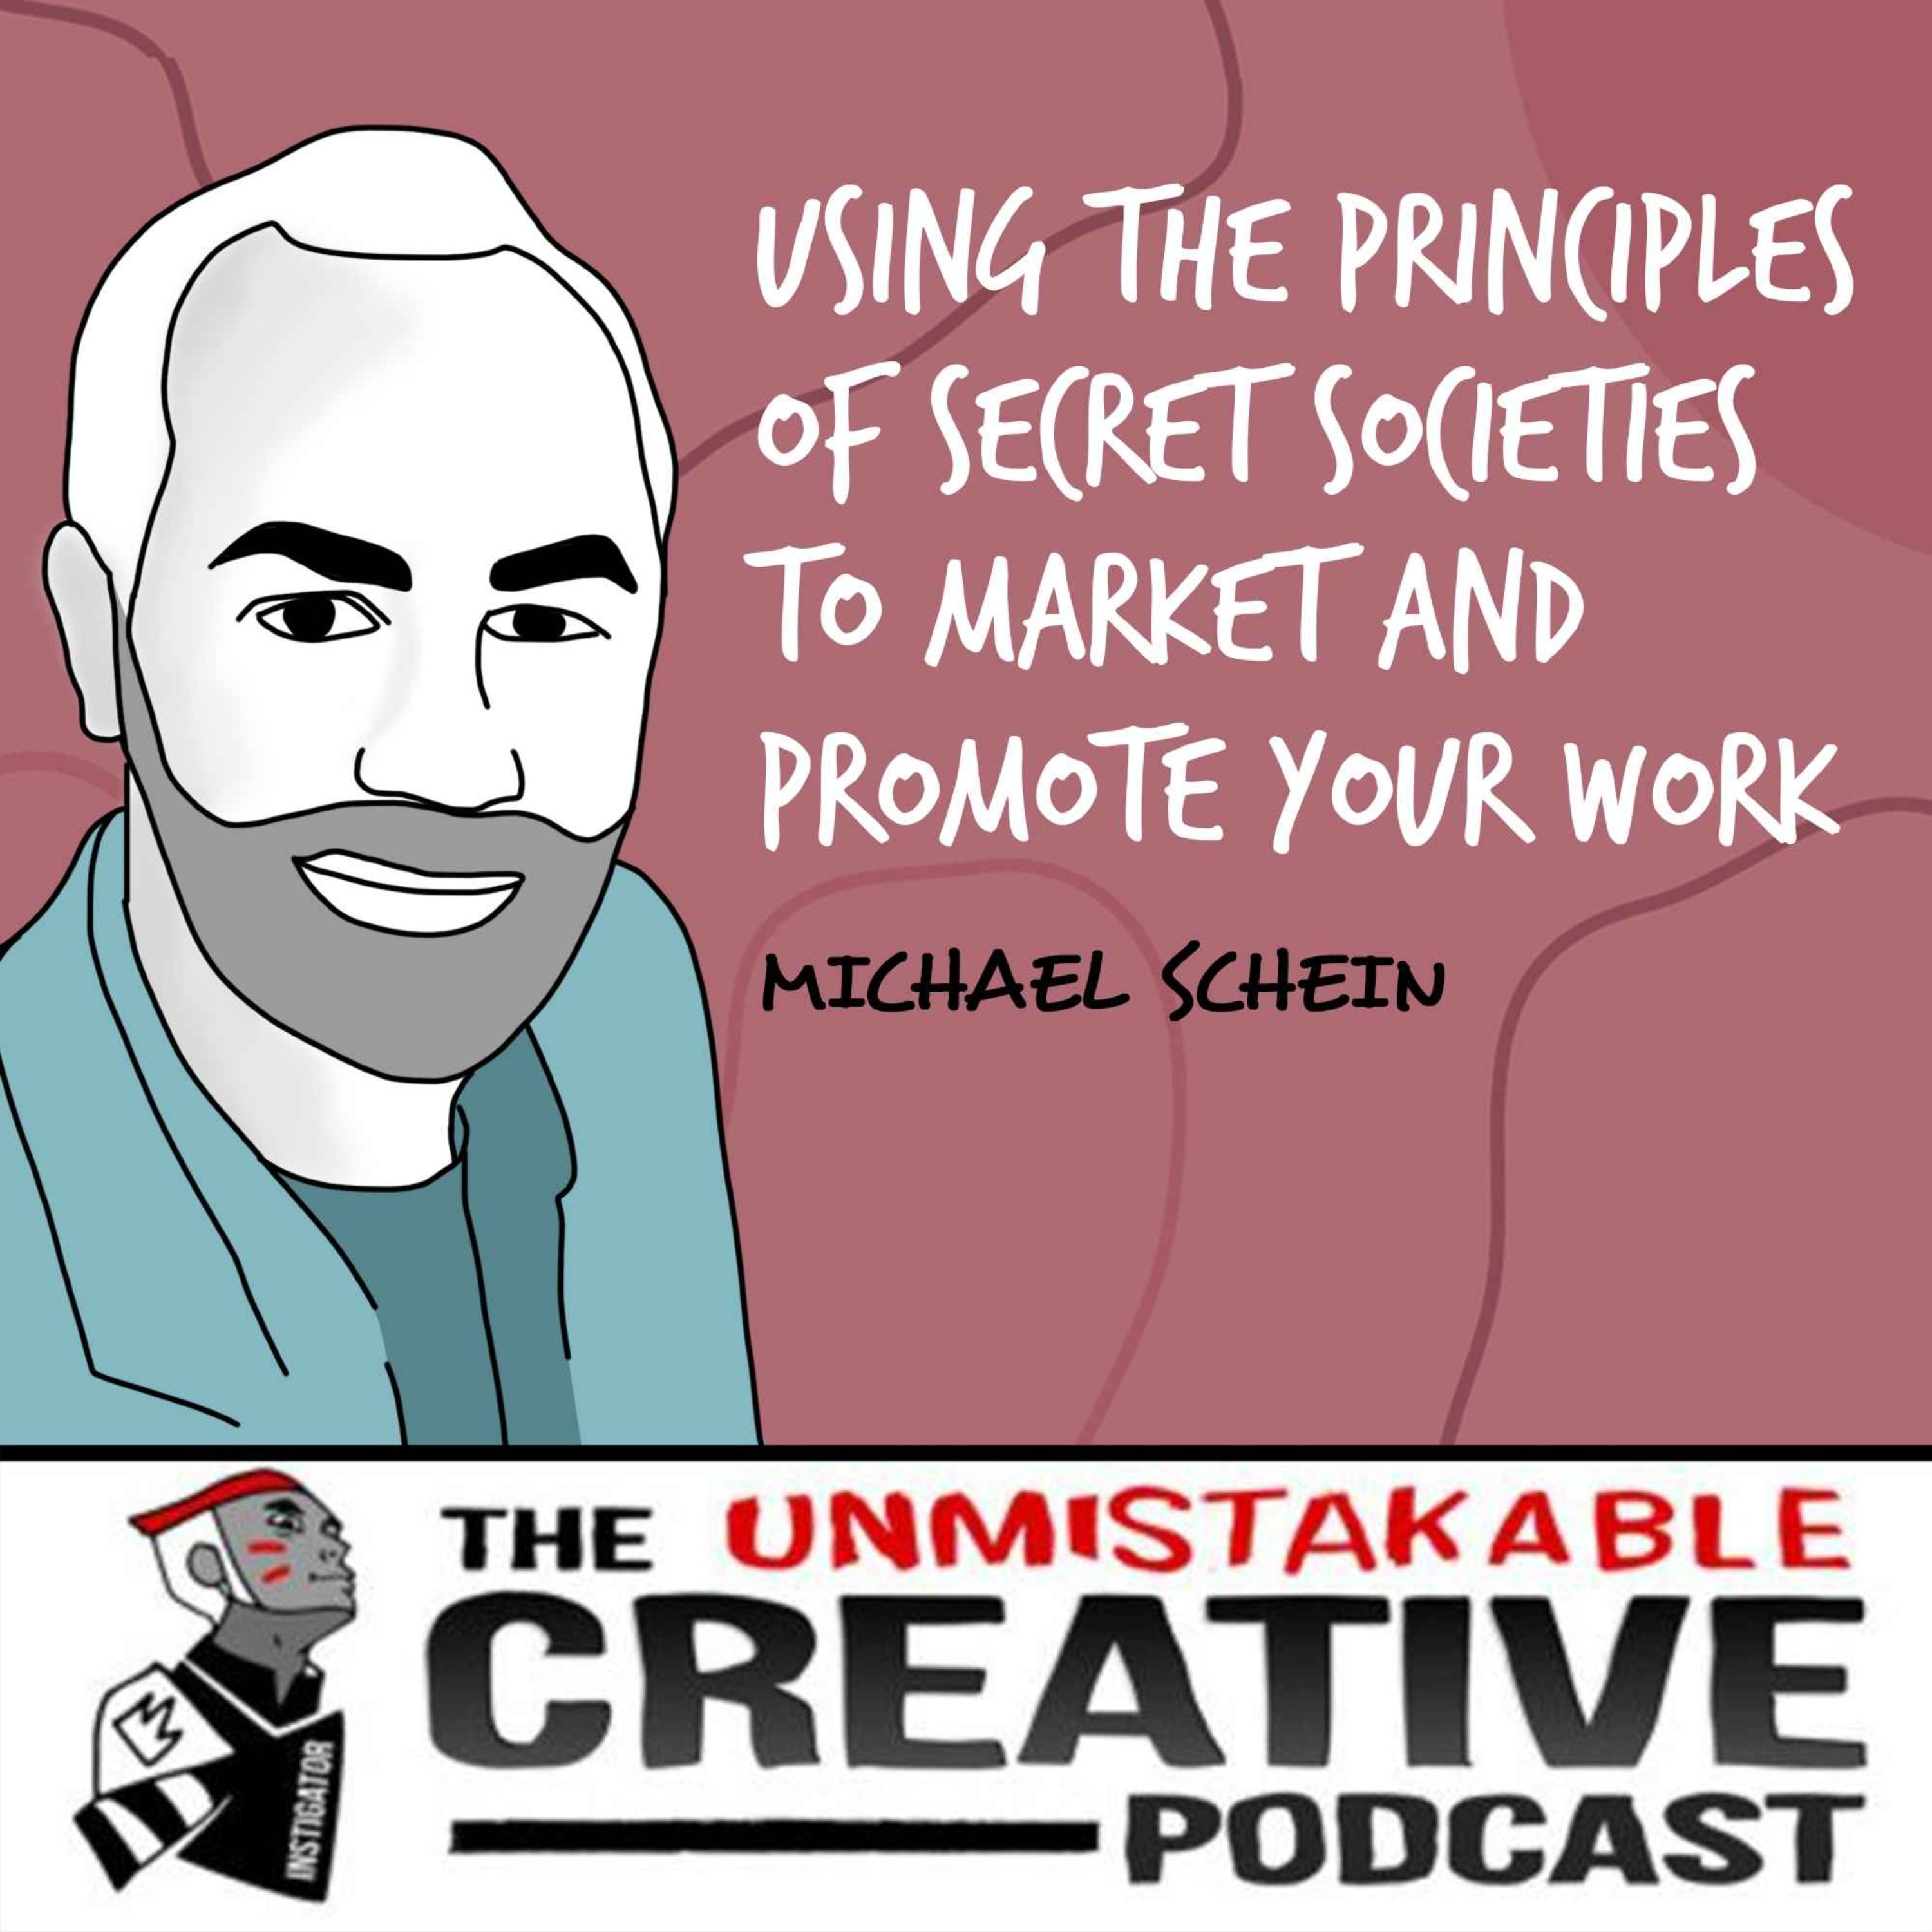 Michael Schein | Using the Principles of Secret Societies to Market and Promote Your Work Image